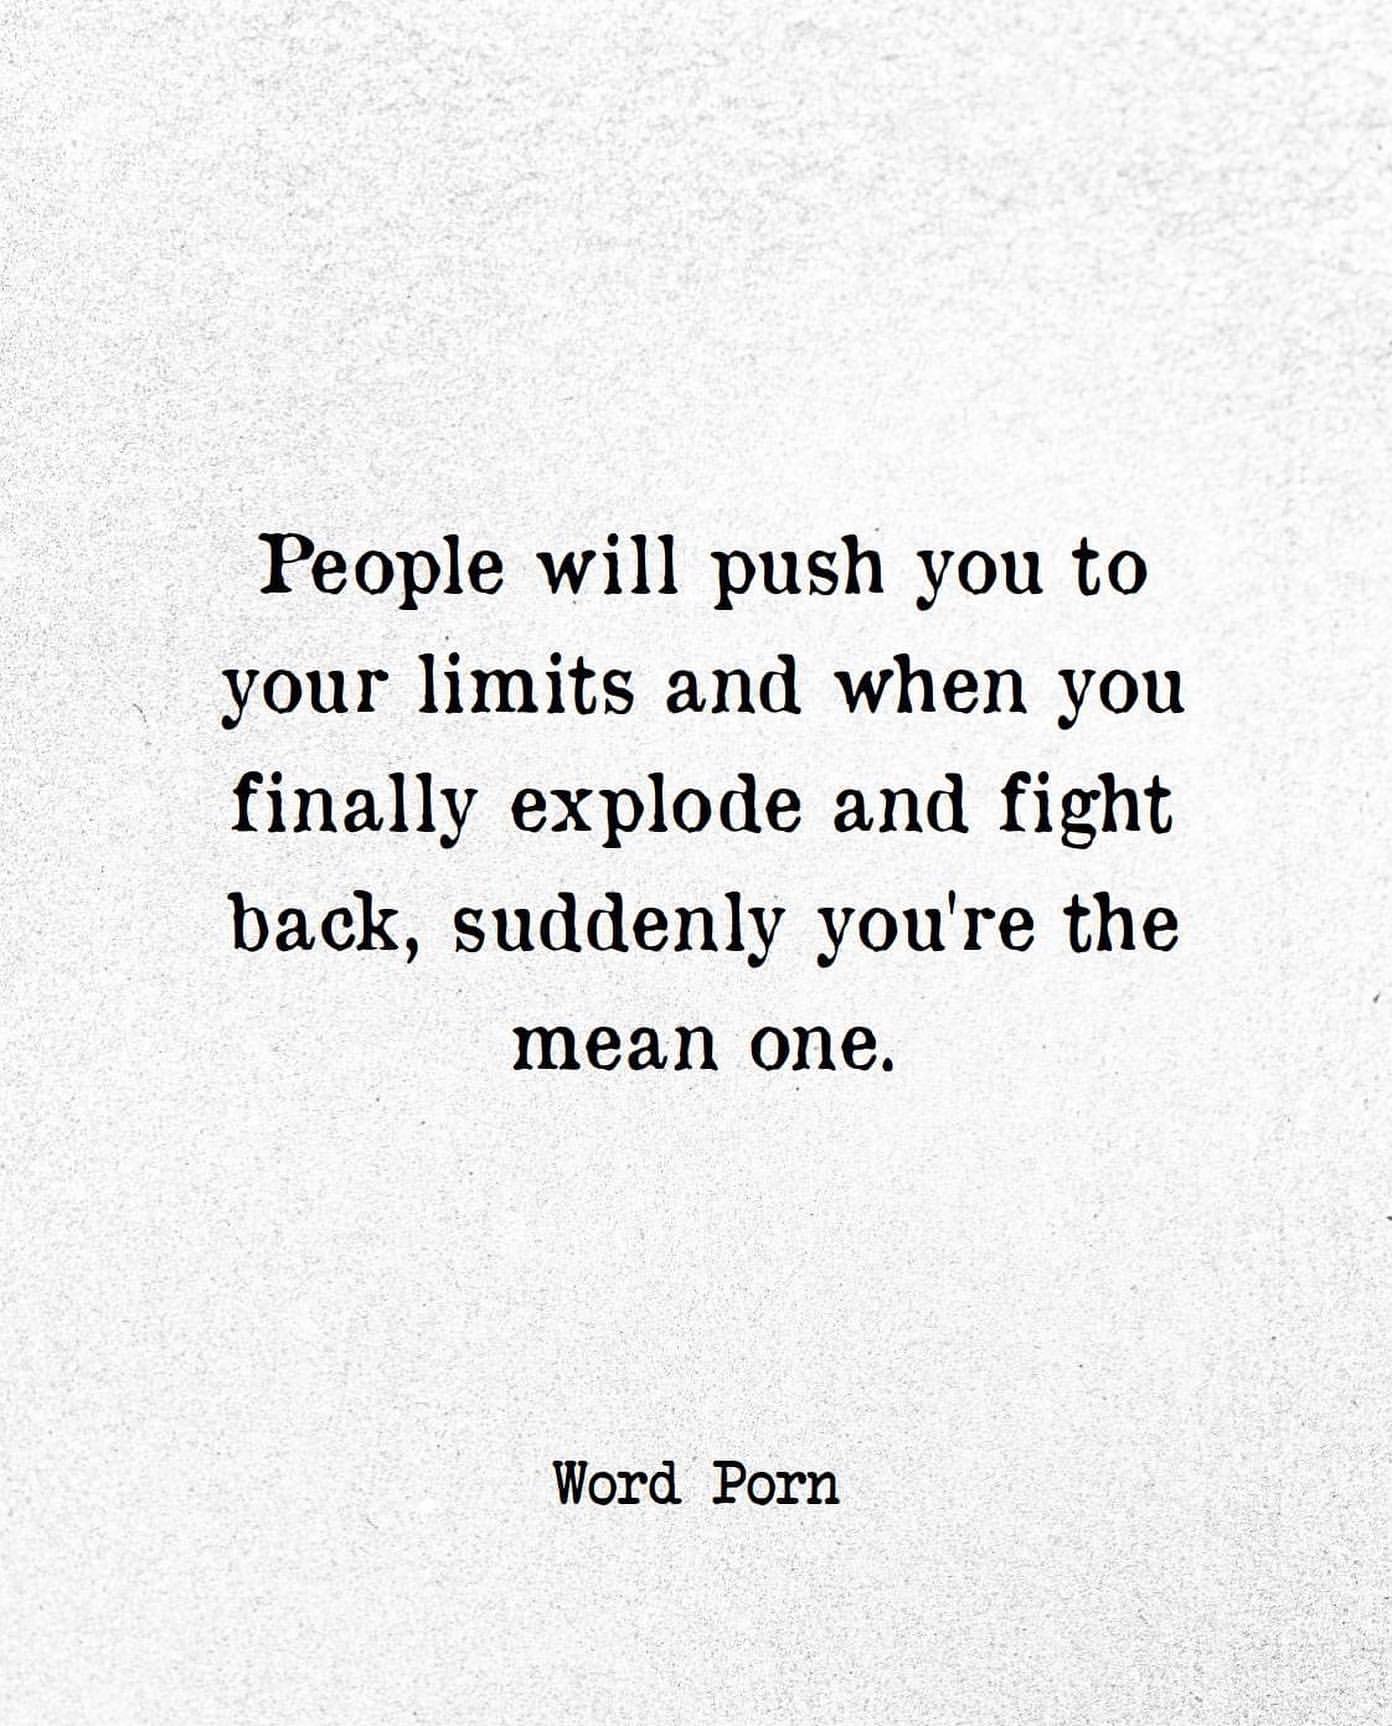 People will push you to your limits and when you finally explode and fight back, suddenly you're the mean one.